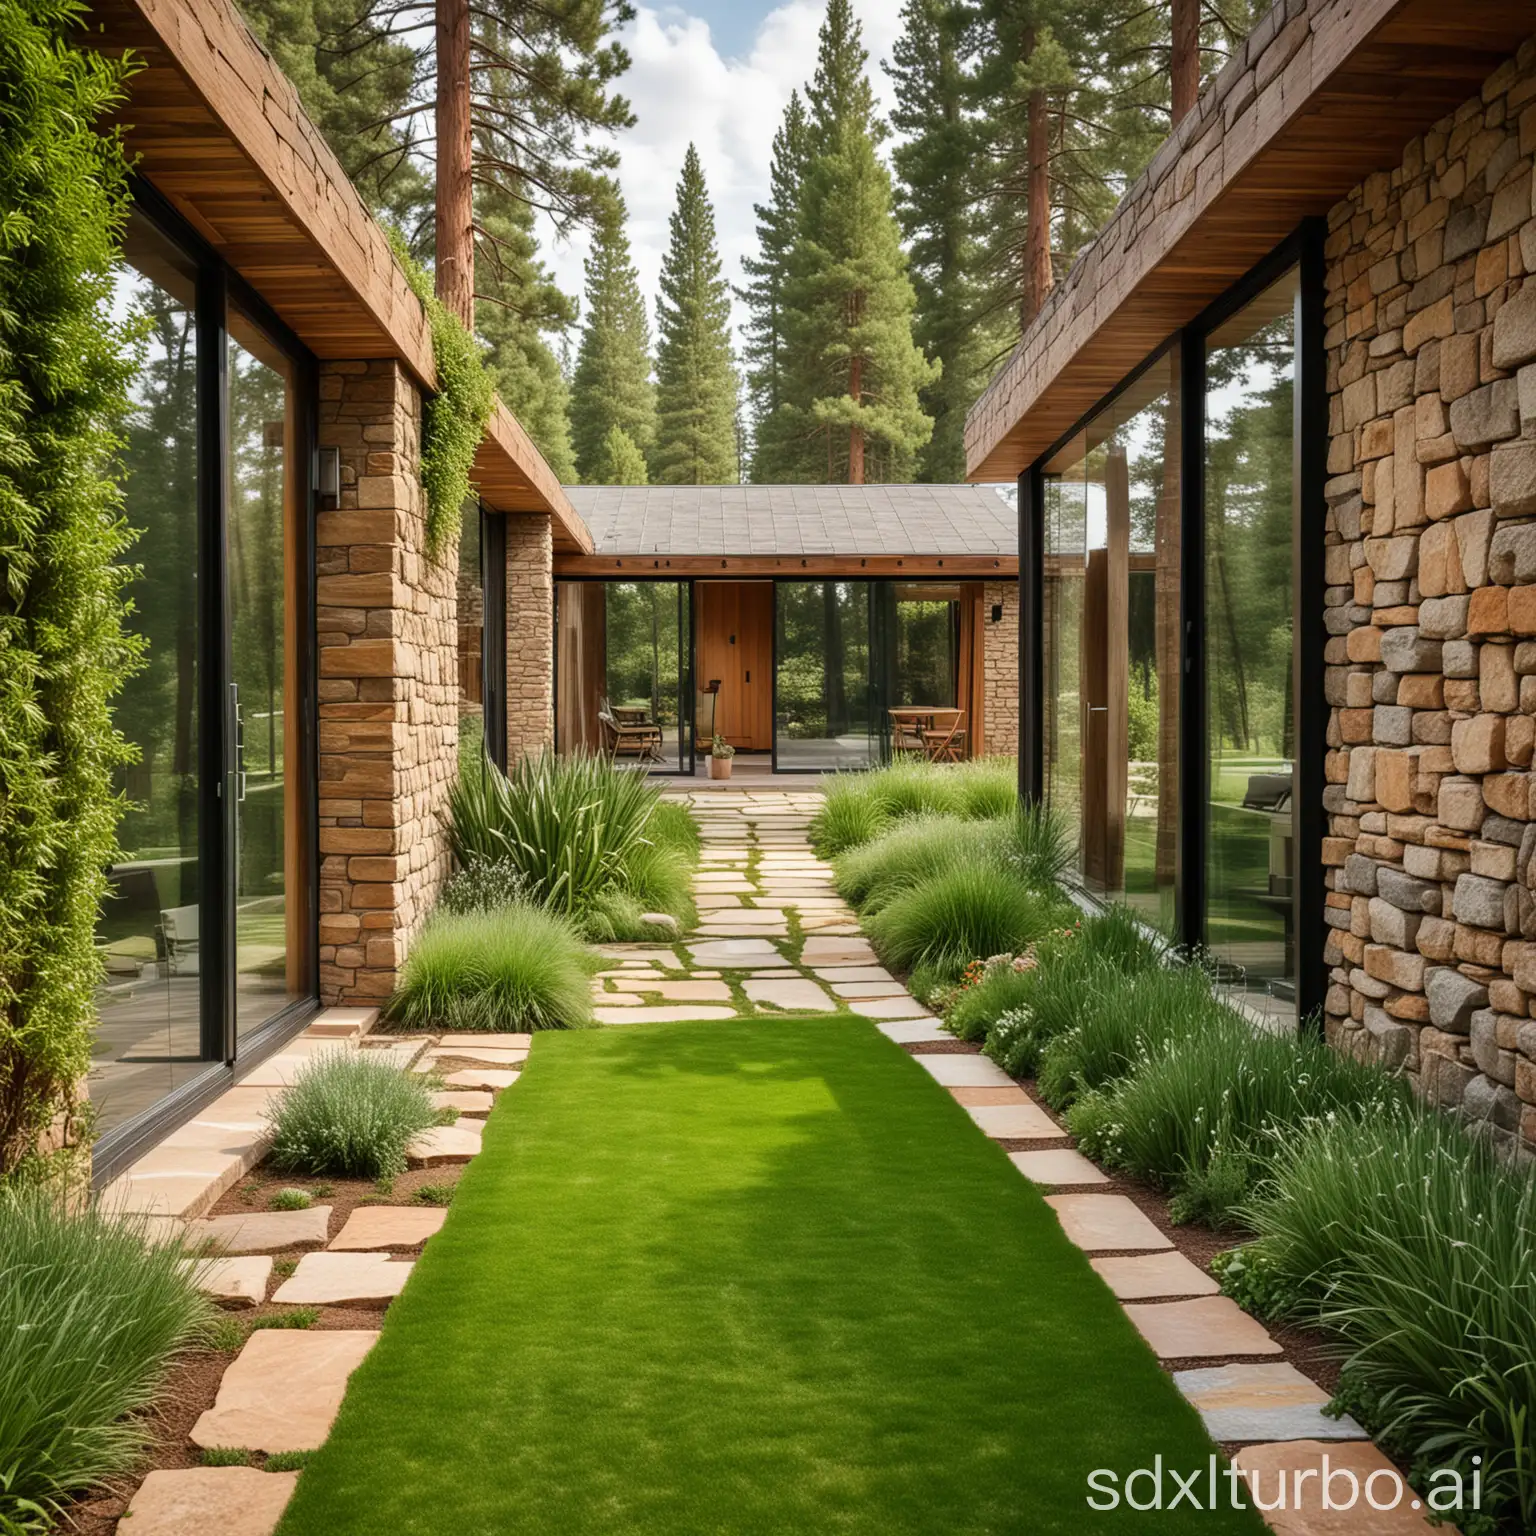 2 eco friendly houses connected by a glass corridor full of plants, stone and wood as main materials, surrounded by beautiful green grass and some sequoias, sharp focus, no blur, perfect lines, perfect geometry